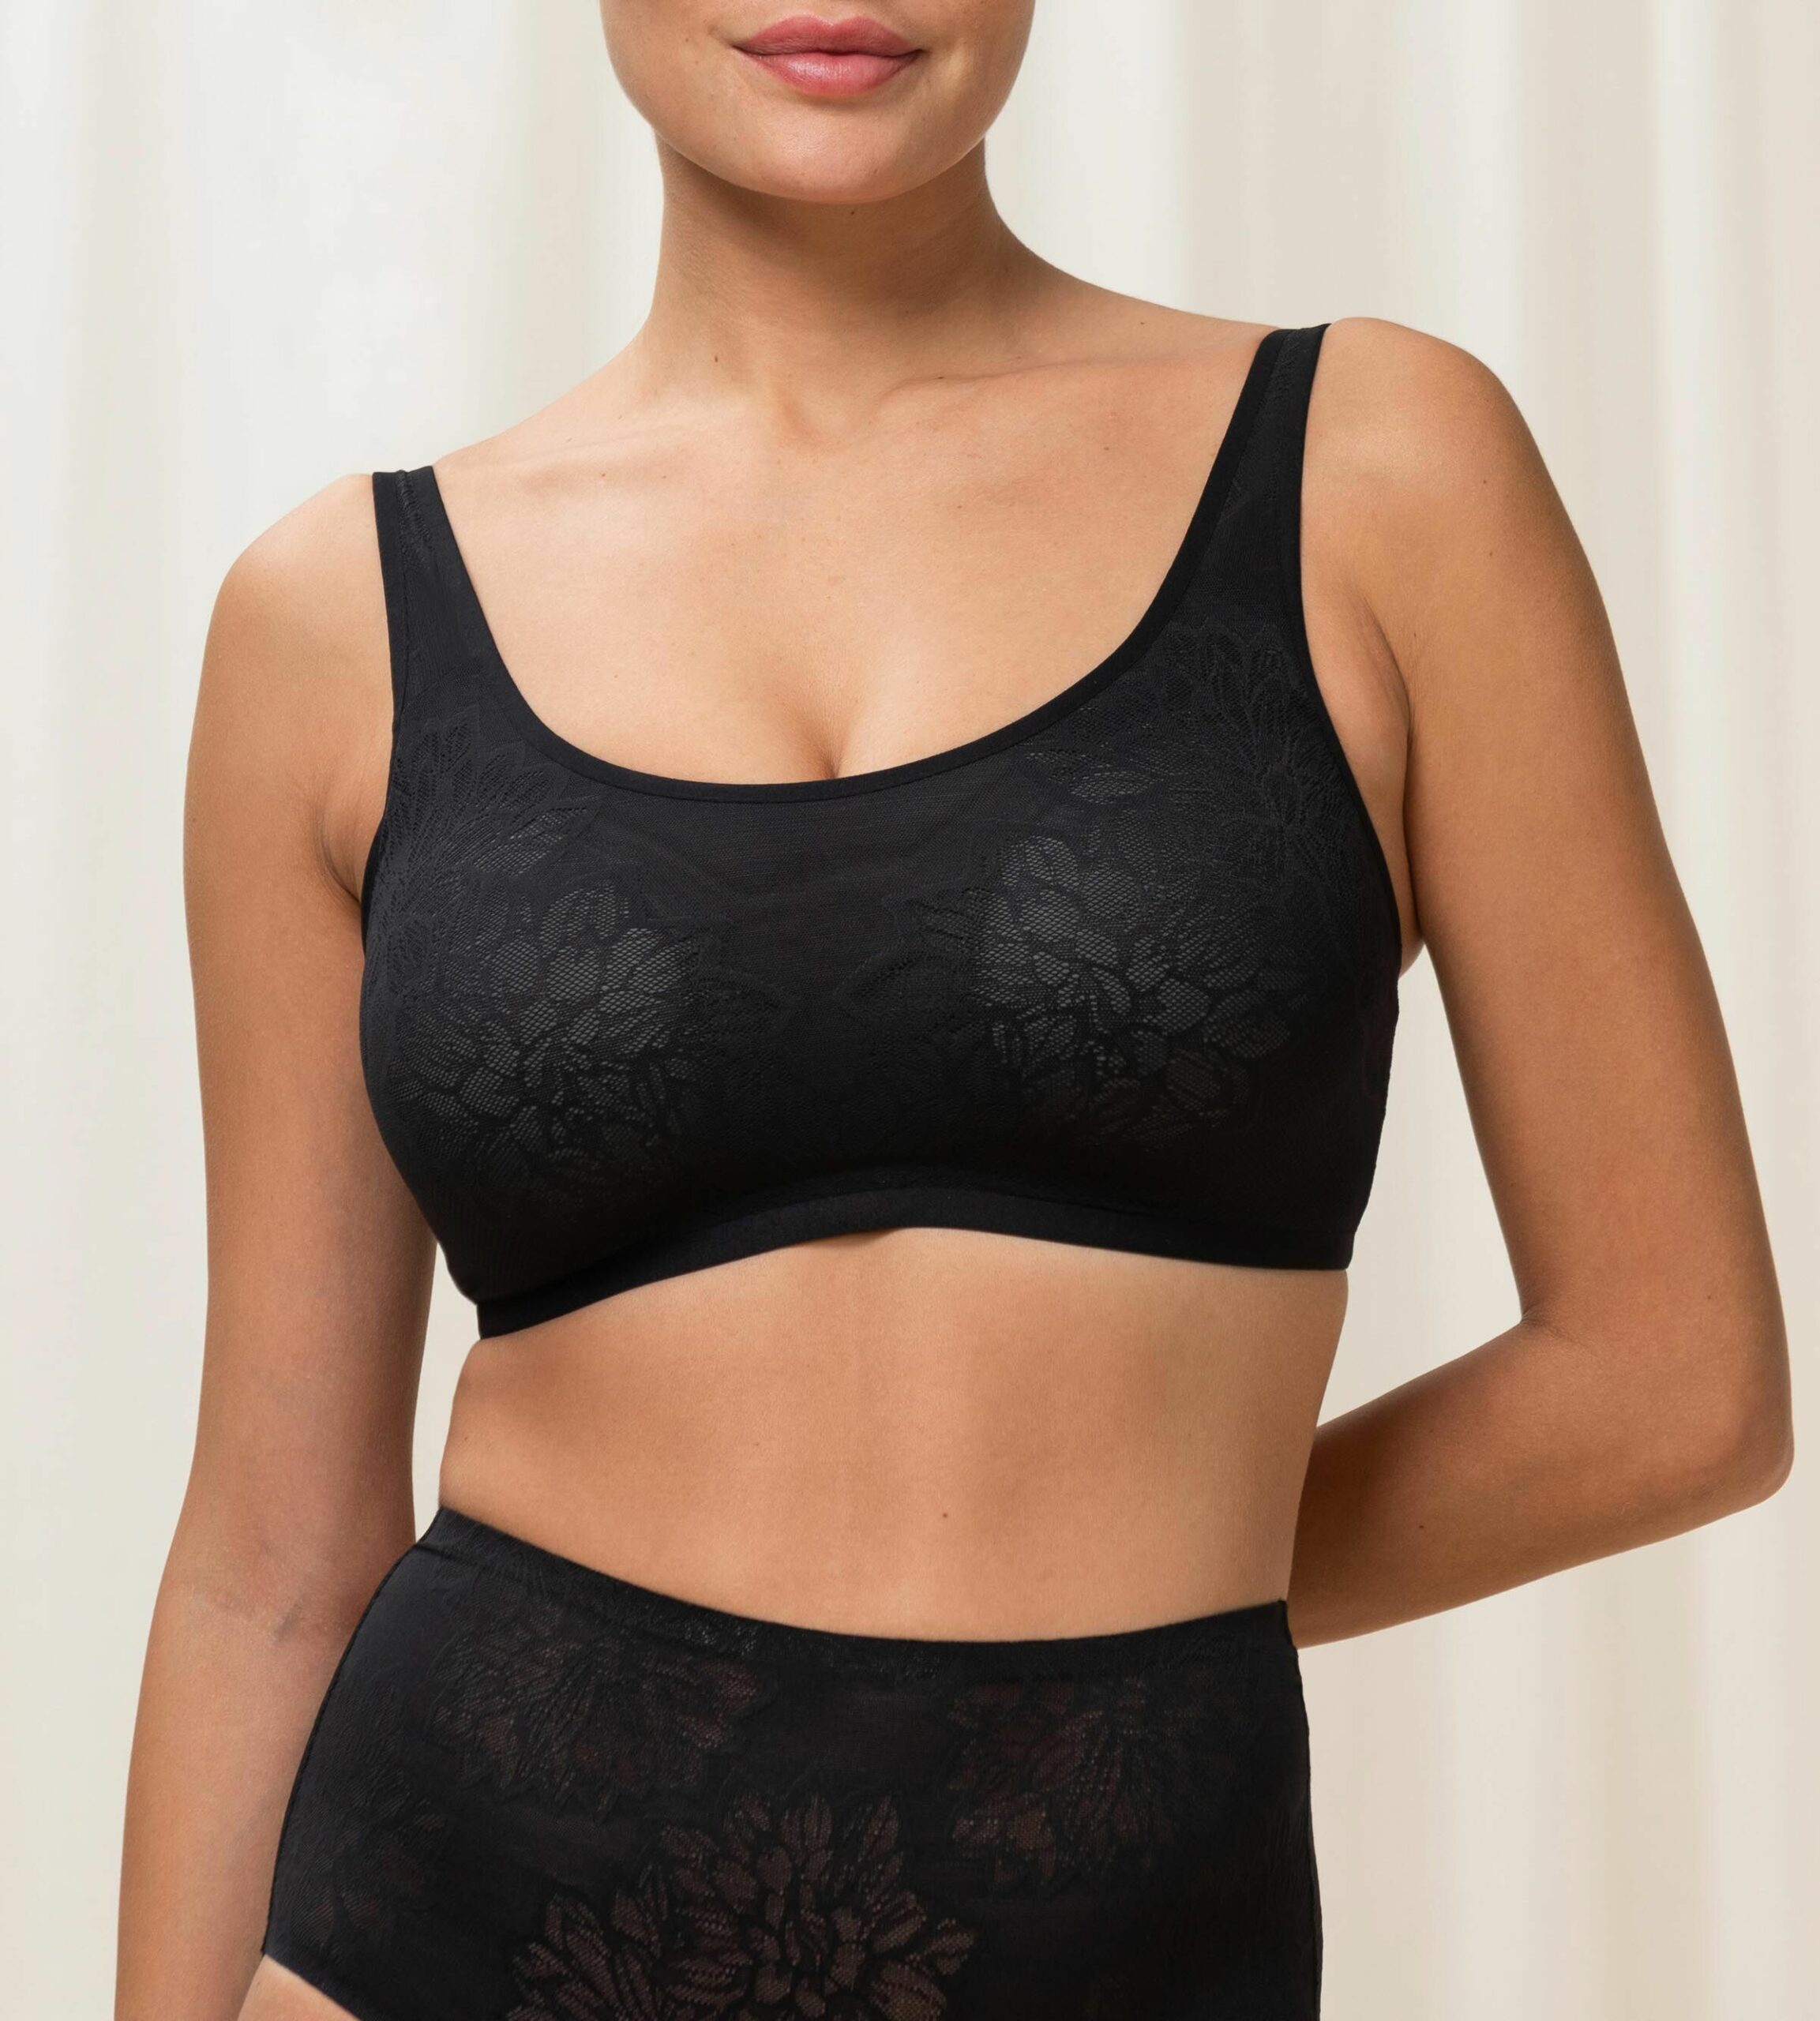 Elys Wimbledon - The new Fit Smart bra from Triumph Lingerie is a bra that  goes on a journey with your body. Thanks to 4D engineering, it adapts to  your unique shape 